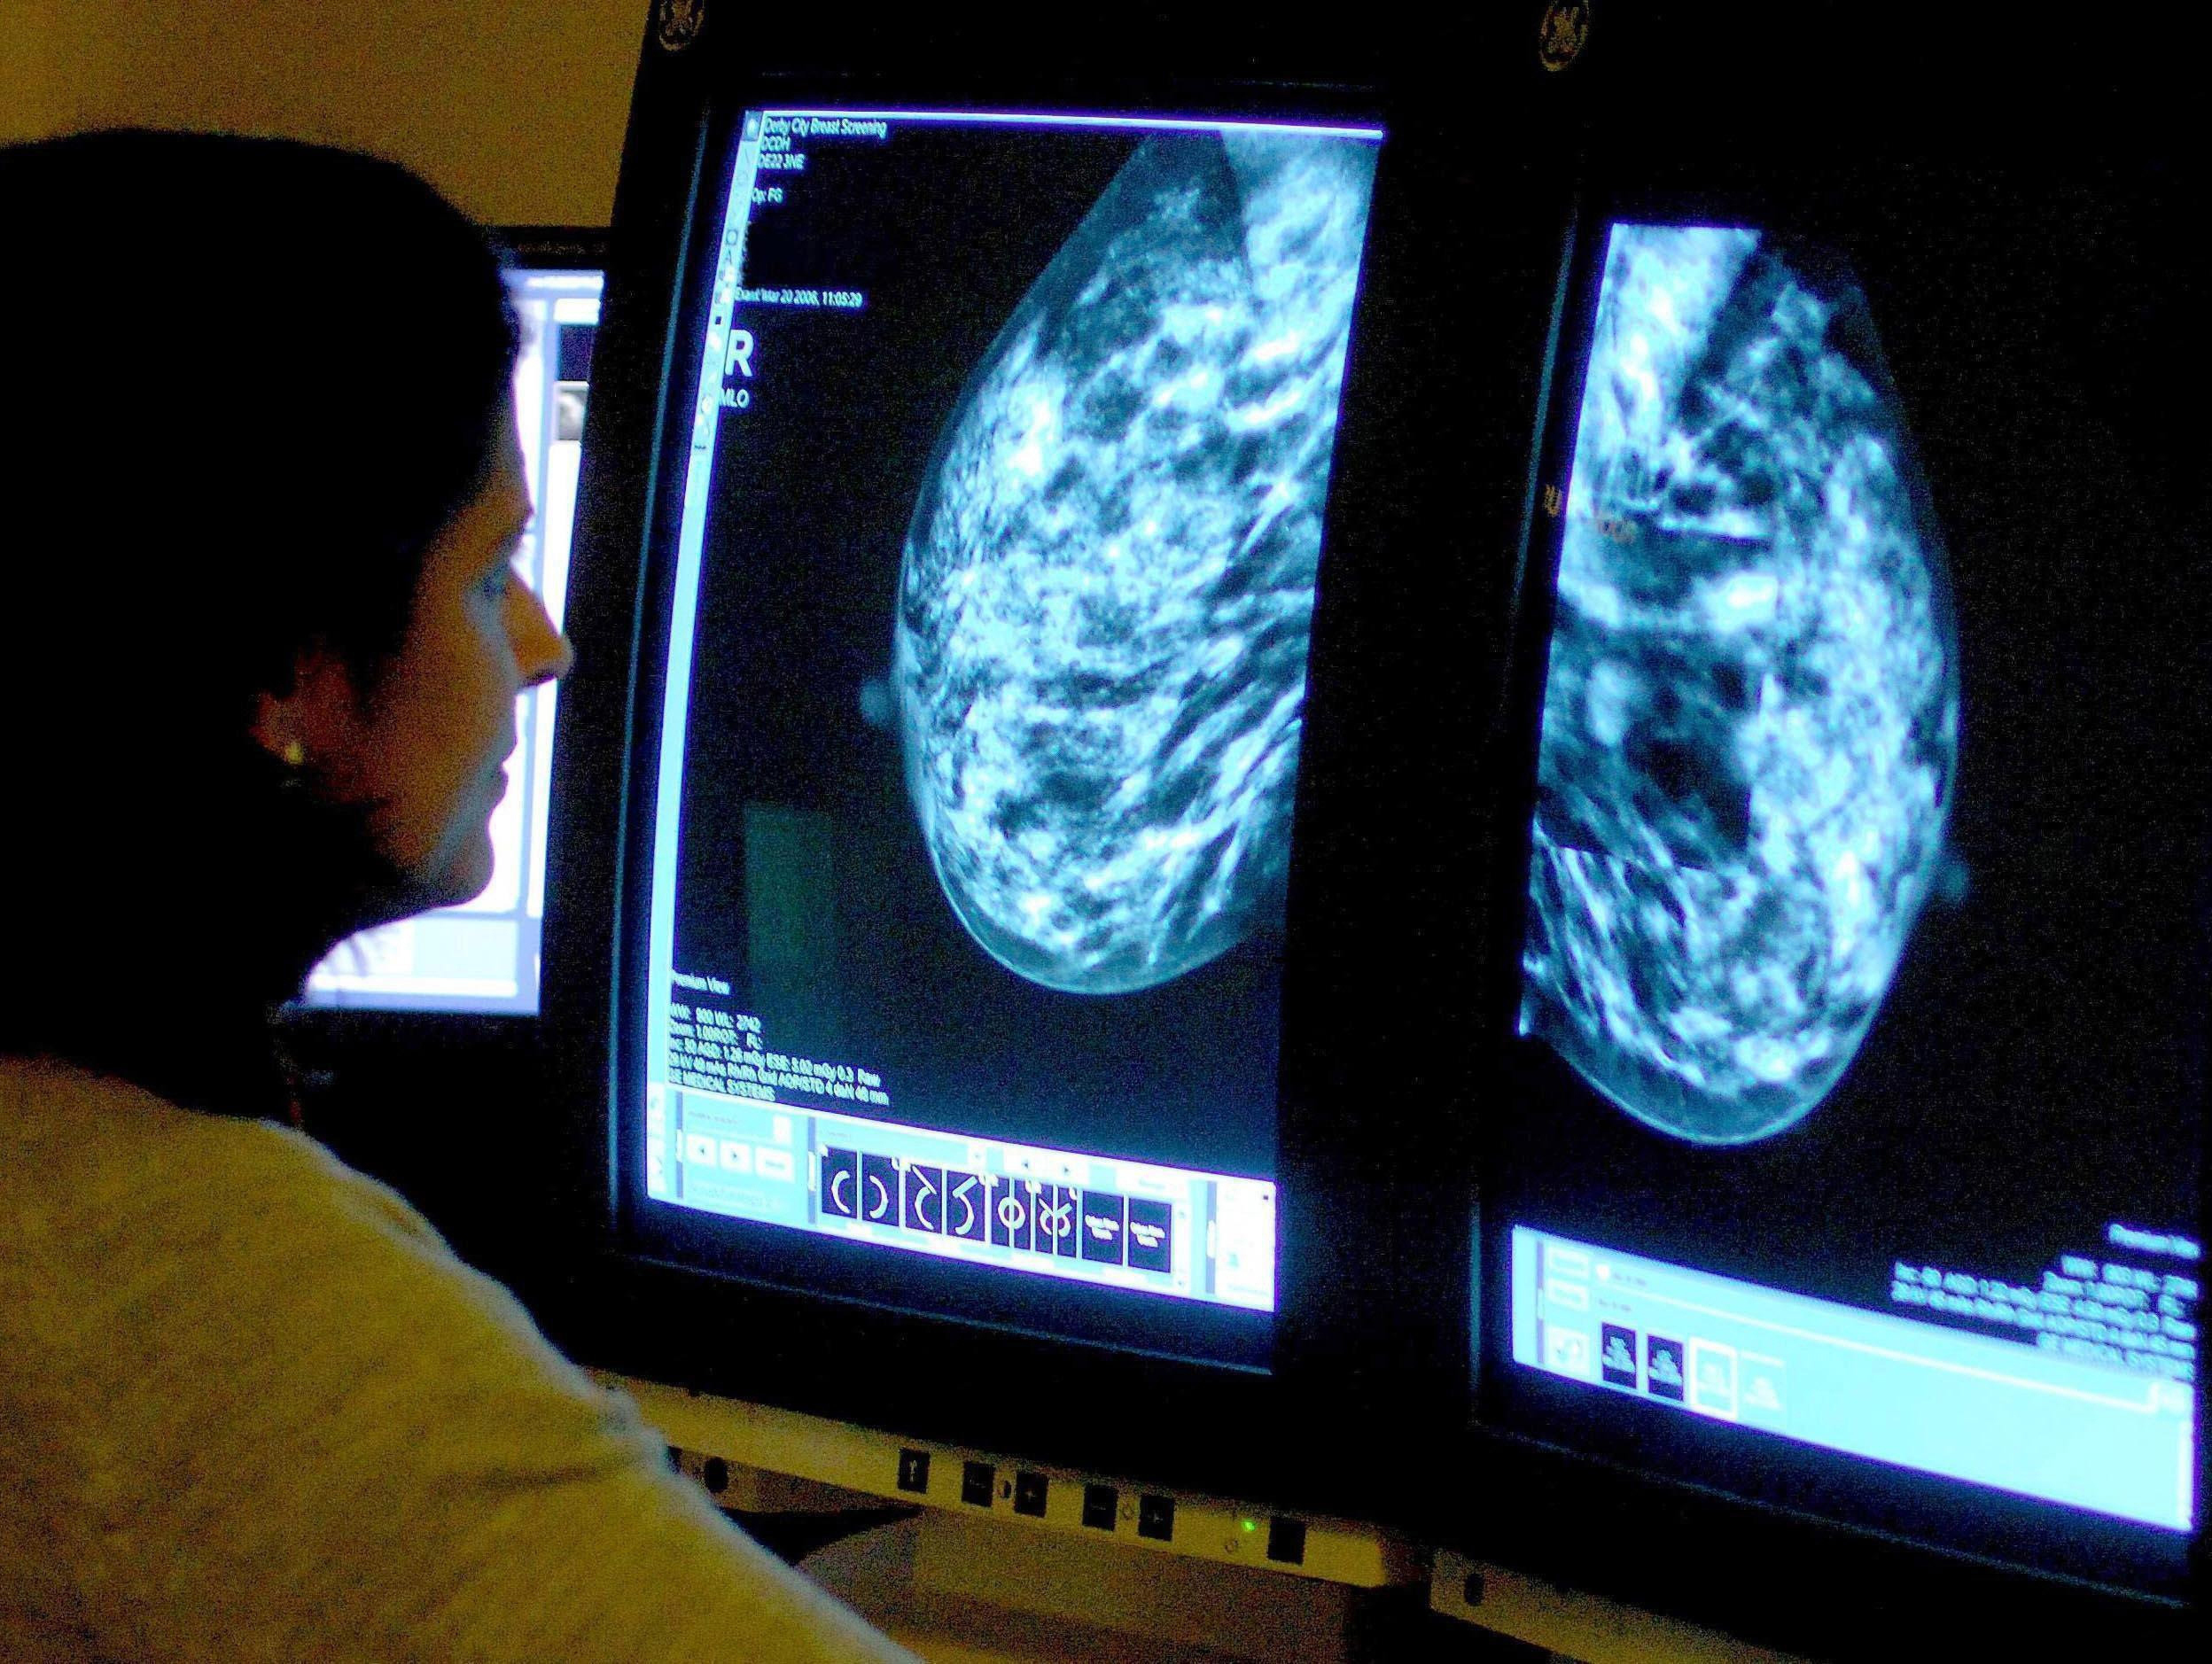 Patients who appear cancer free when they stop therapy may relapse many years later with tumours spreading through their body, new research shows. (Rui Vieira/PA Wire)